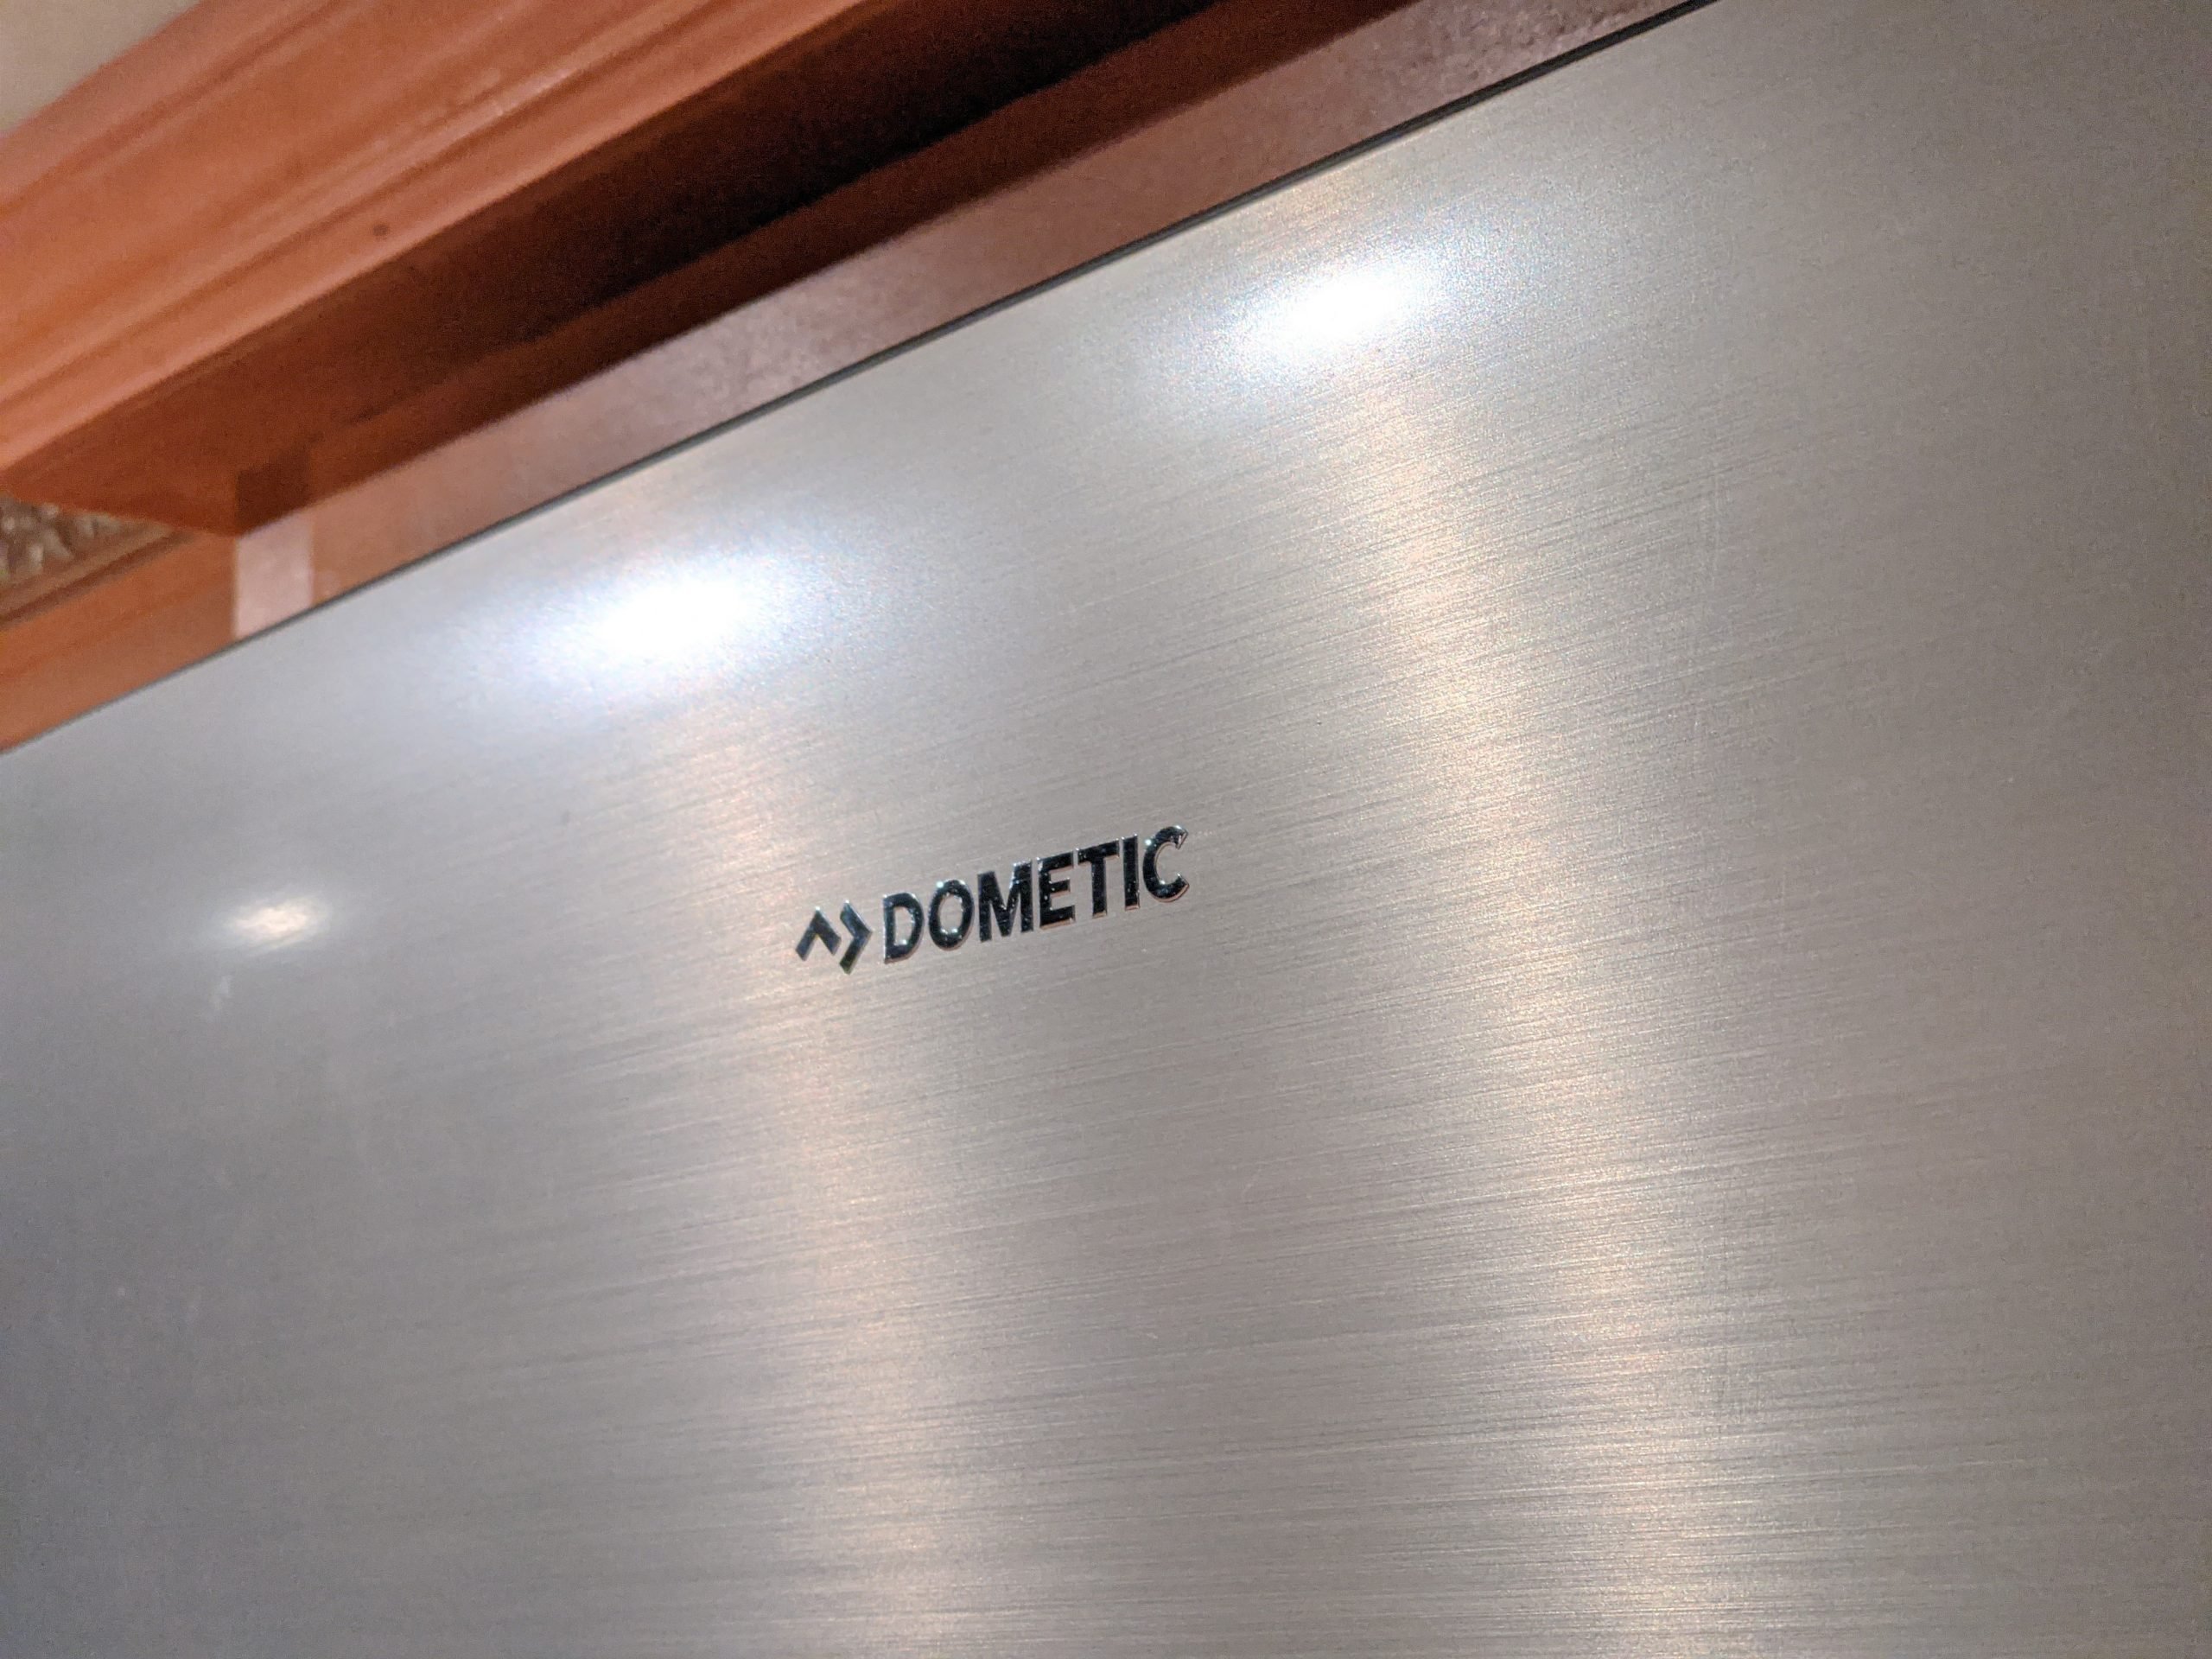 How to Use Your Dometic RV Fridge